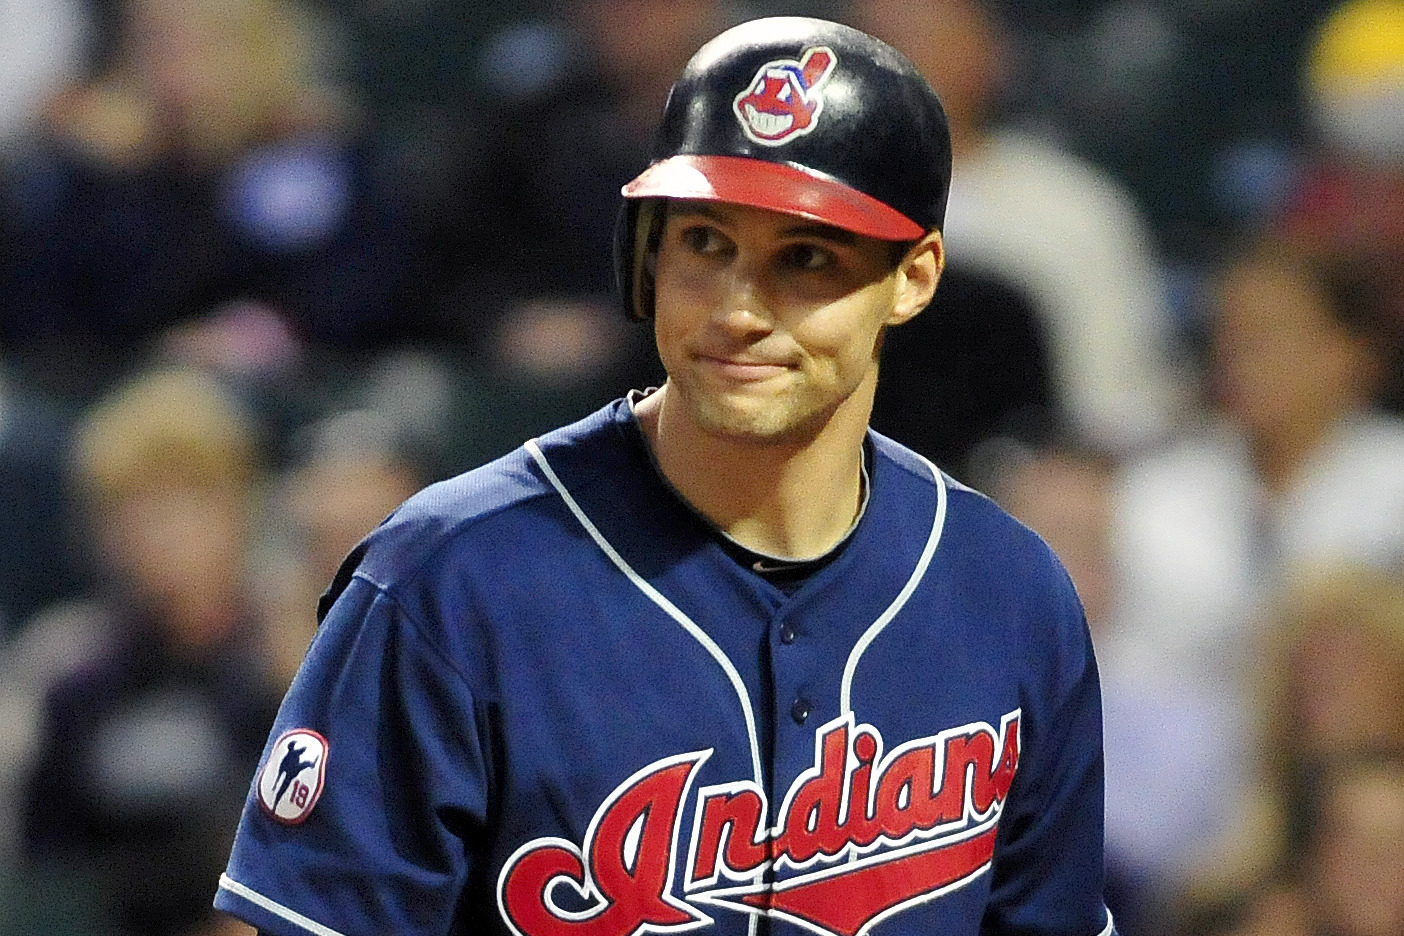 Grady Sizemore Injured: Why the Cleveland Indians Need Shelley